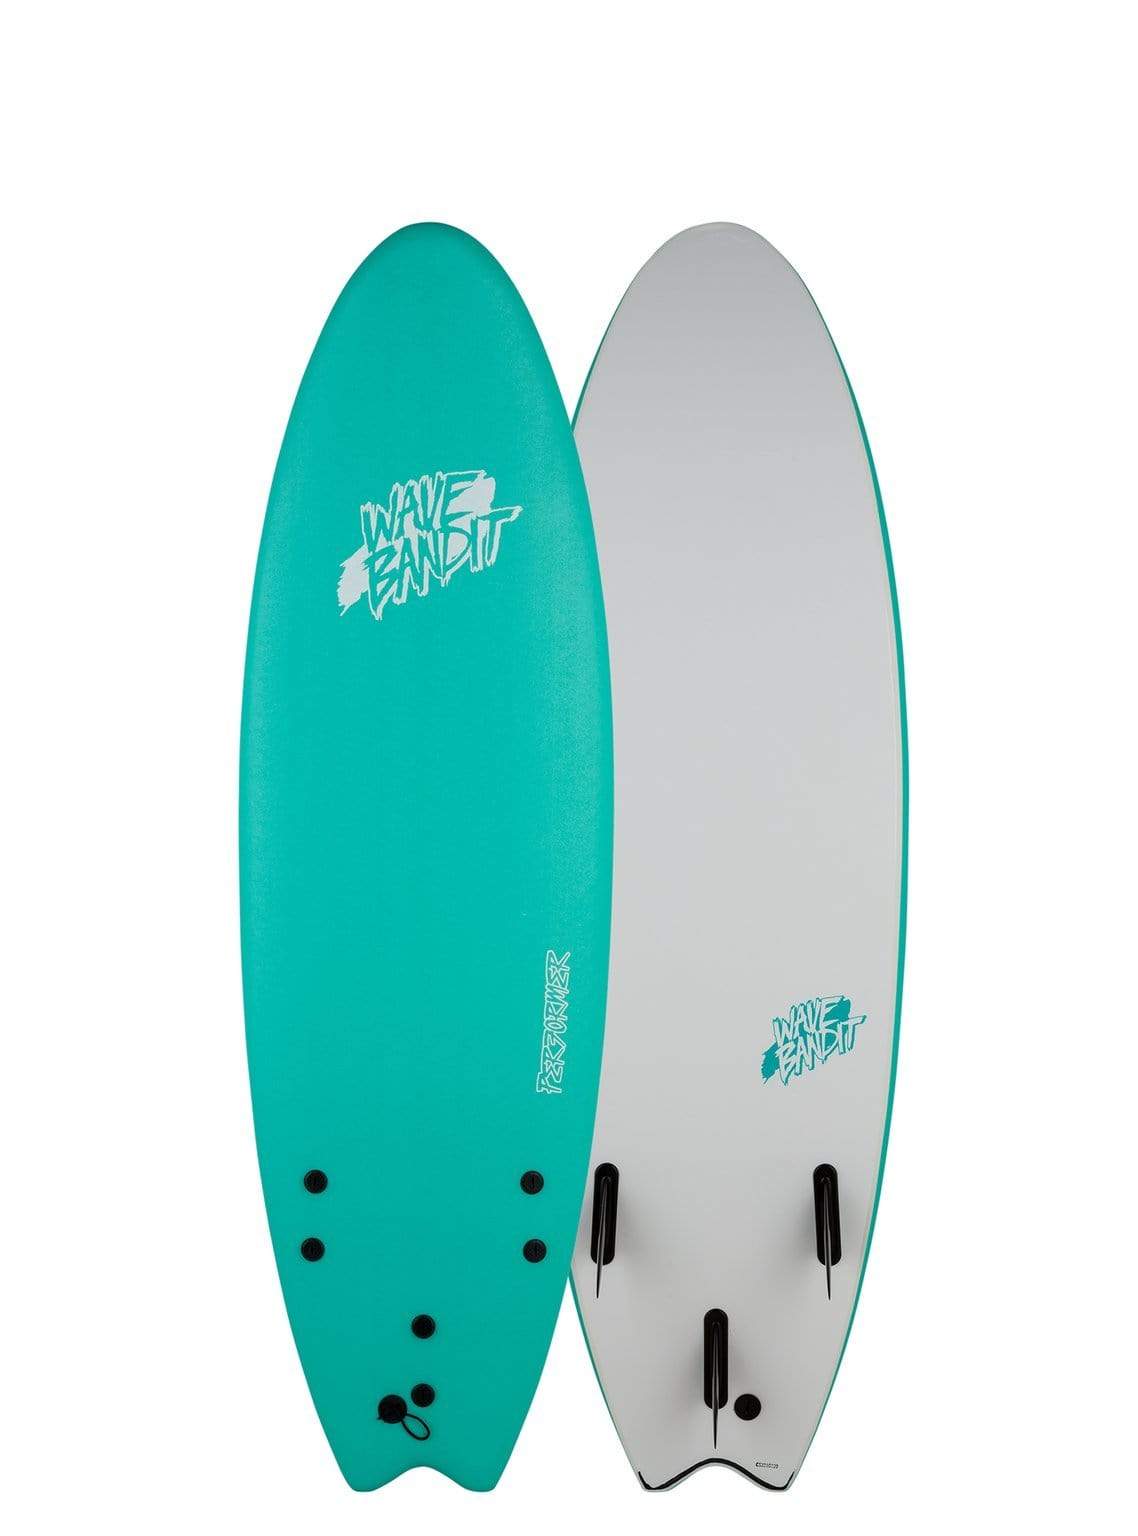 Catch Surf Wave Bandit 6'0" Performer Tri Fin - Turquoise - Good Wave